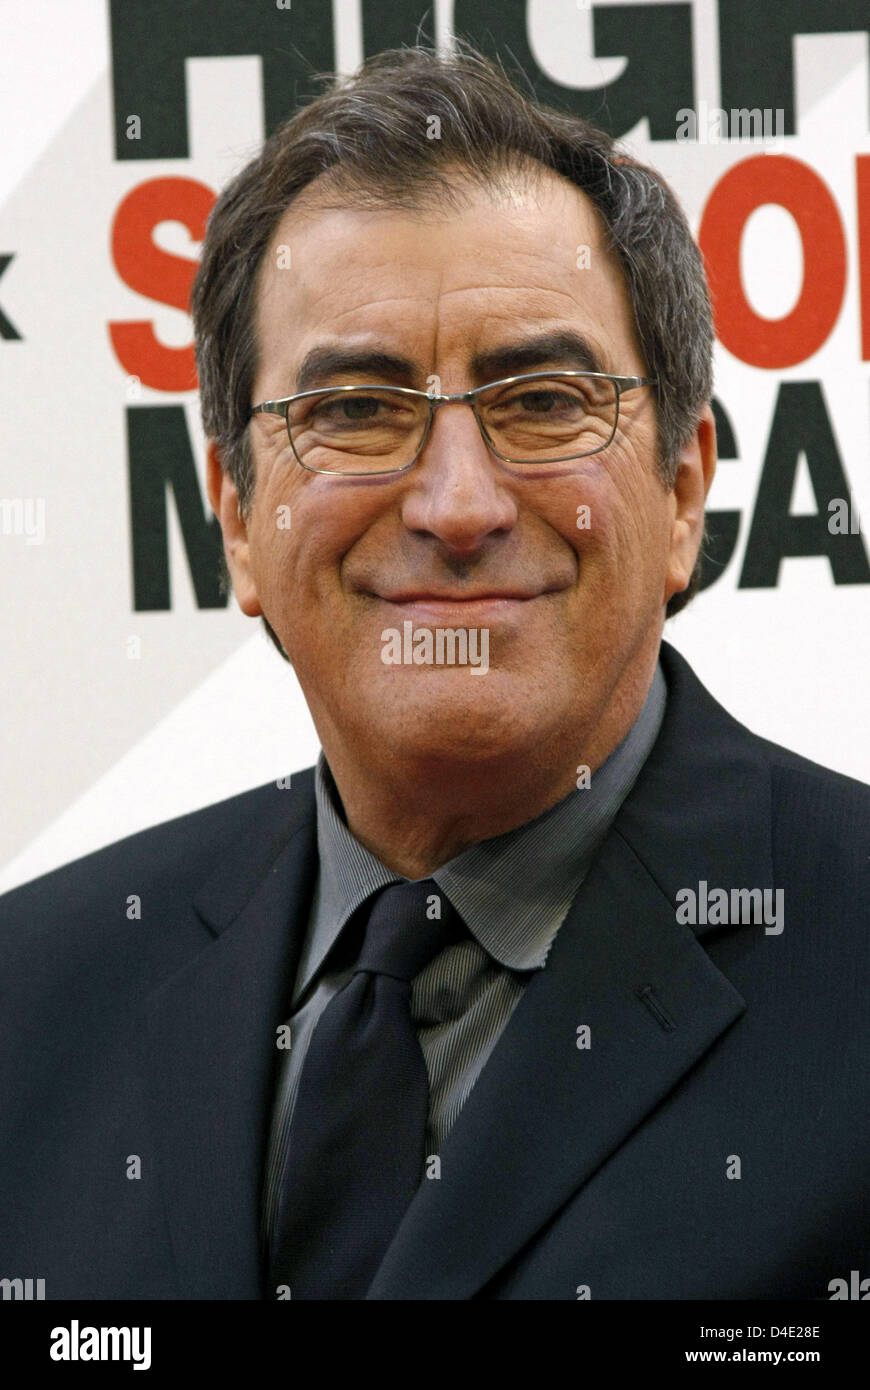 American director Kenny Ortega arrives at the German premiere of 'High School Musical 3: Senior Year' at Mathaeser Filmpalast in Munich, Germany, 05 October 2008. Photo: Hubert Boesl Stock Photo